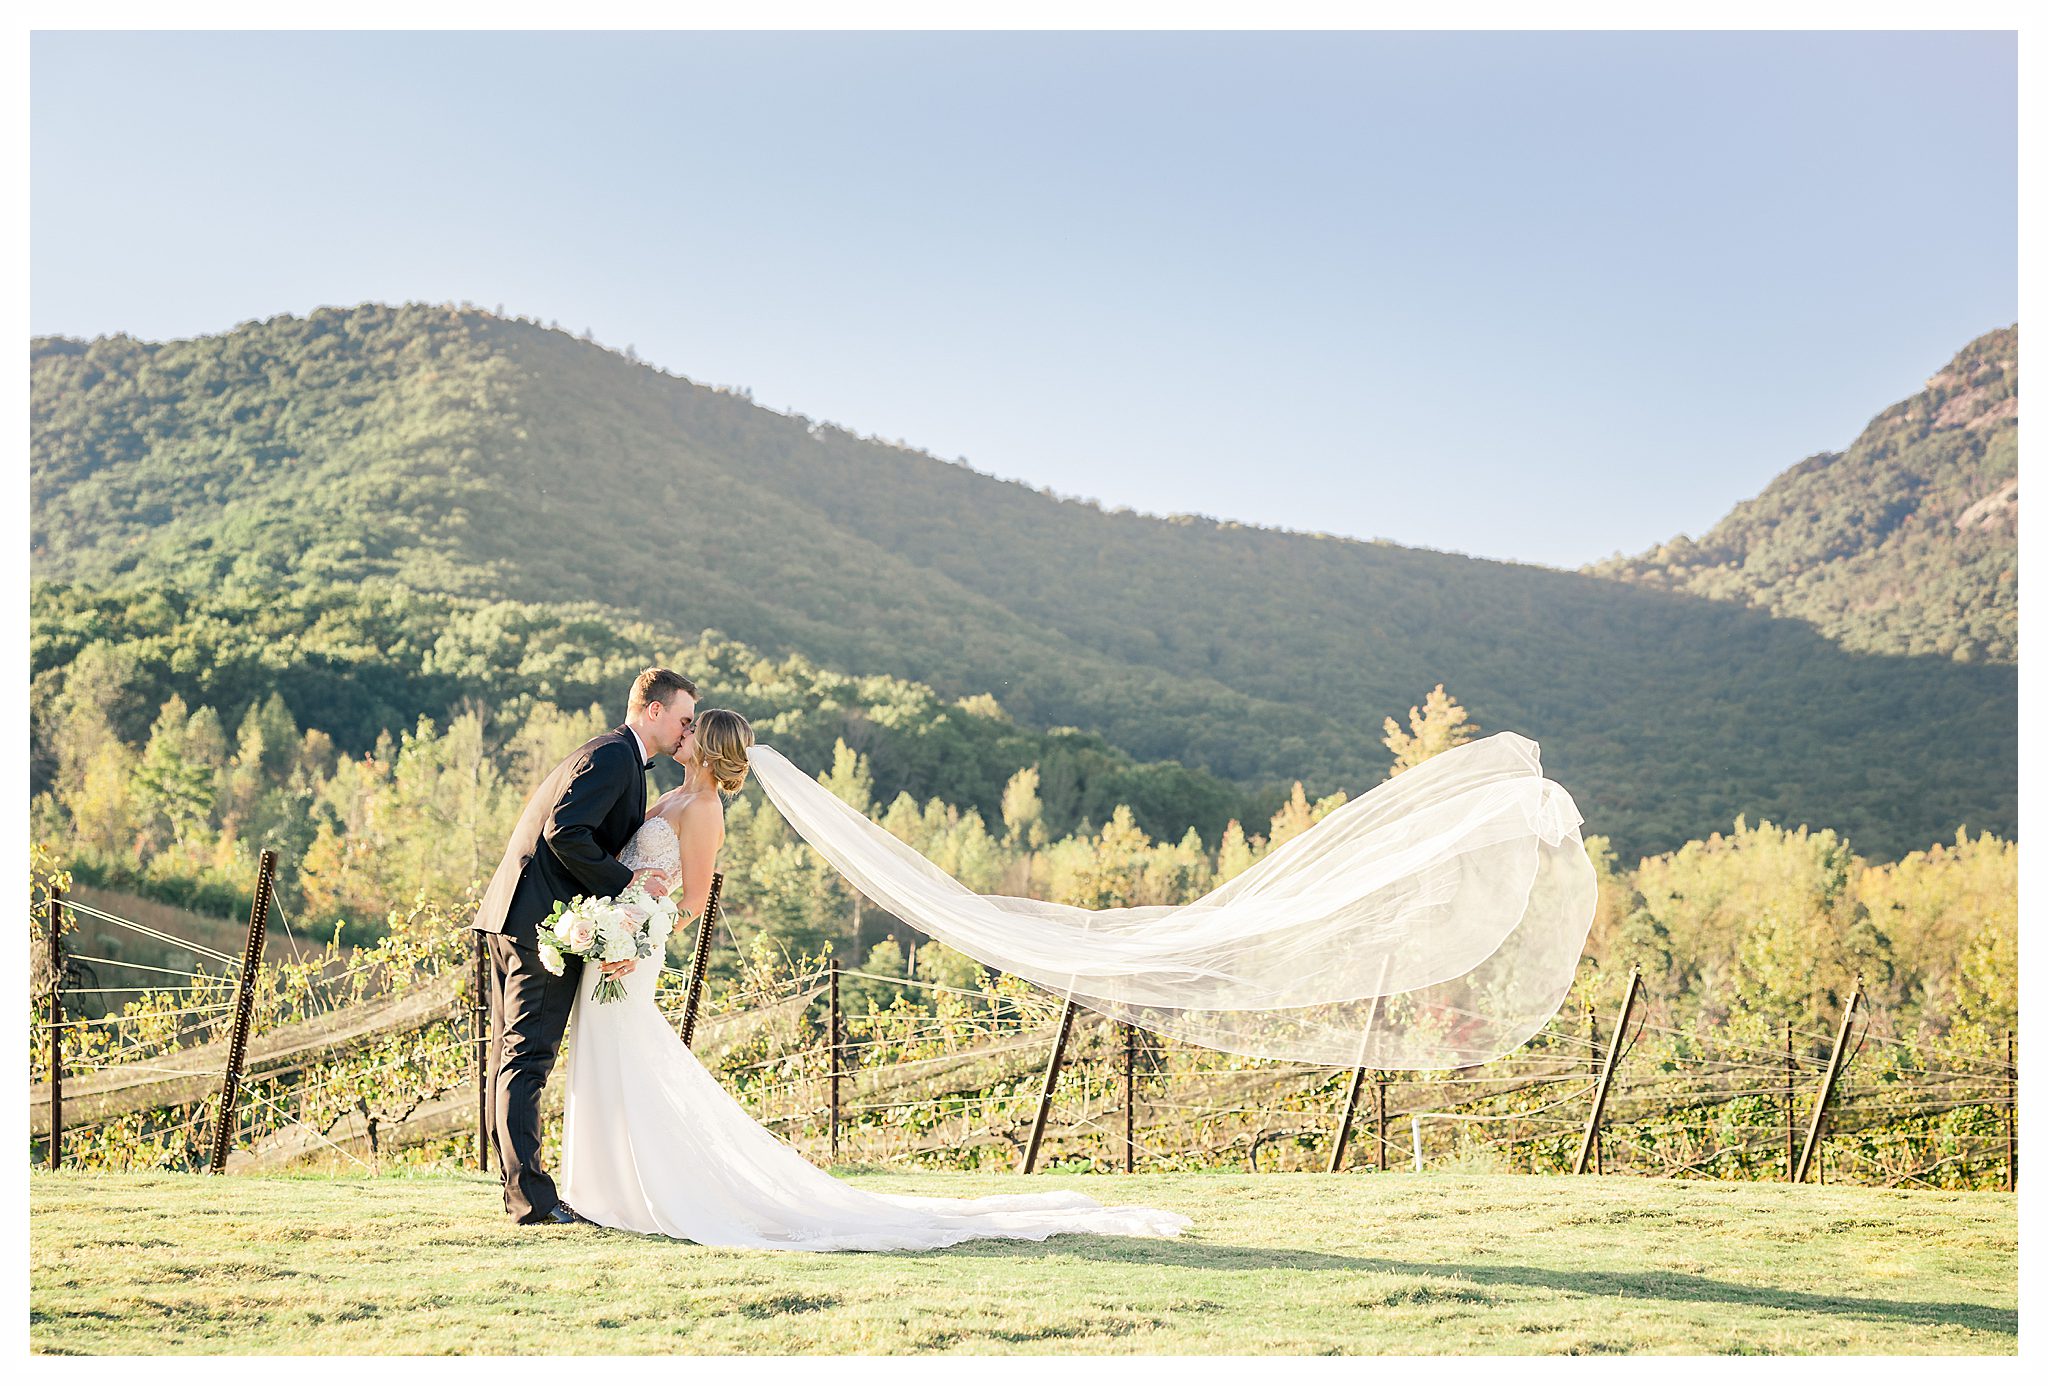 The best pictures from Yonah Mountain Vineyards Wedding Photographer photography